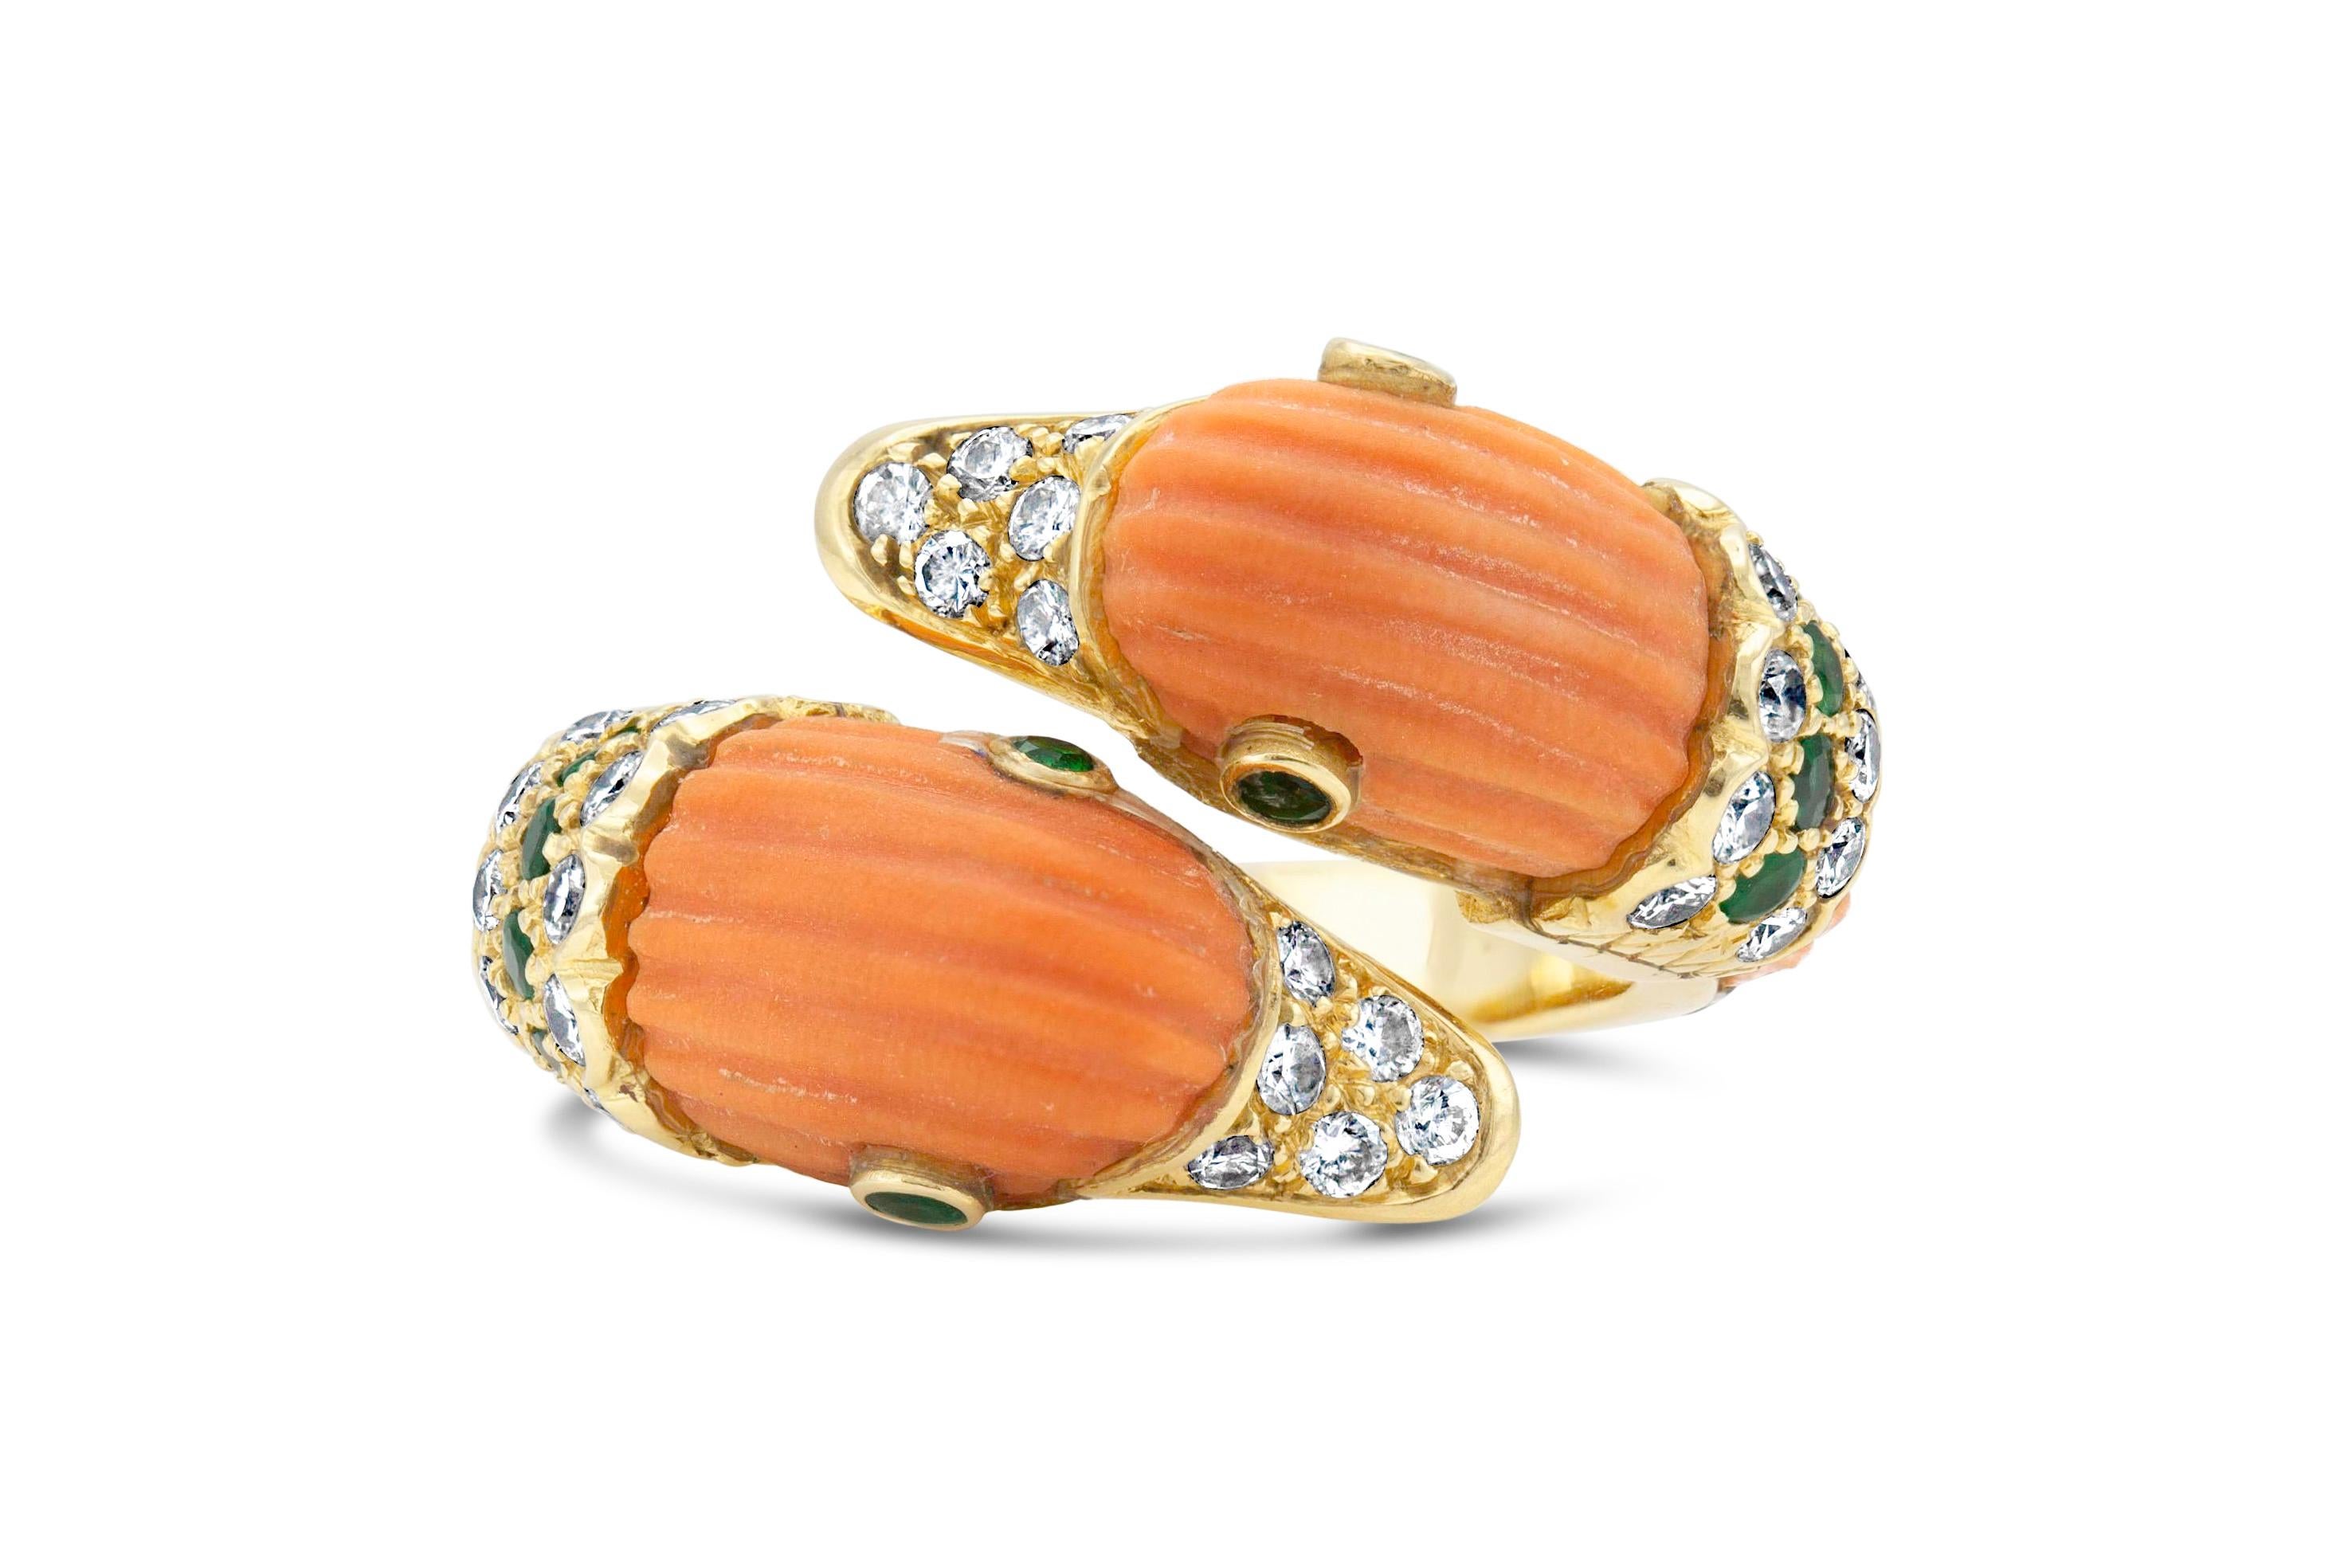 Finely crafted in 18k yellow gold with carved Coral, Diamonds, and Emeralds.
Signed by Van Cleef & Arpels
Size 4 3/4